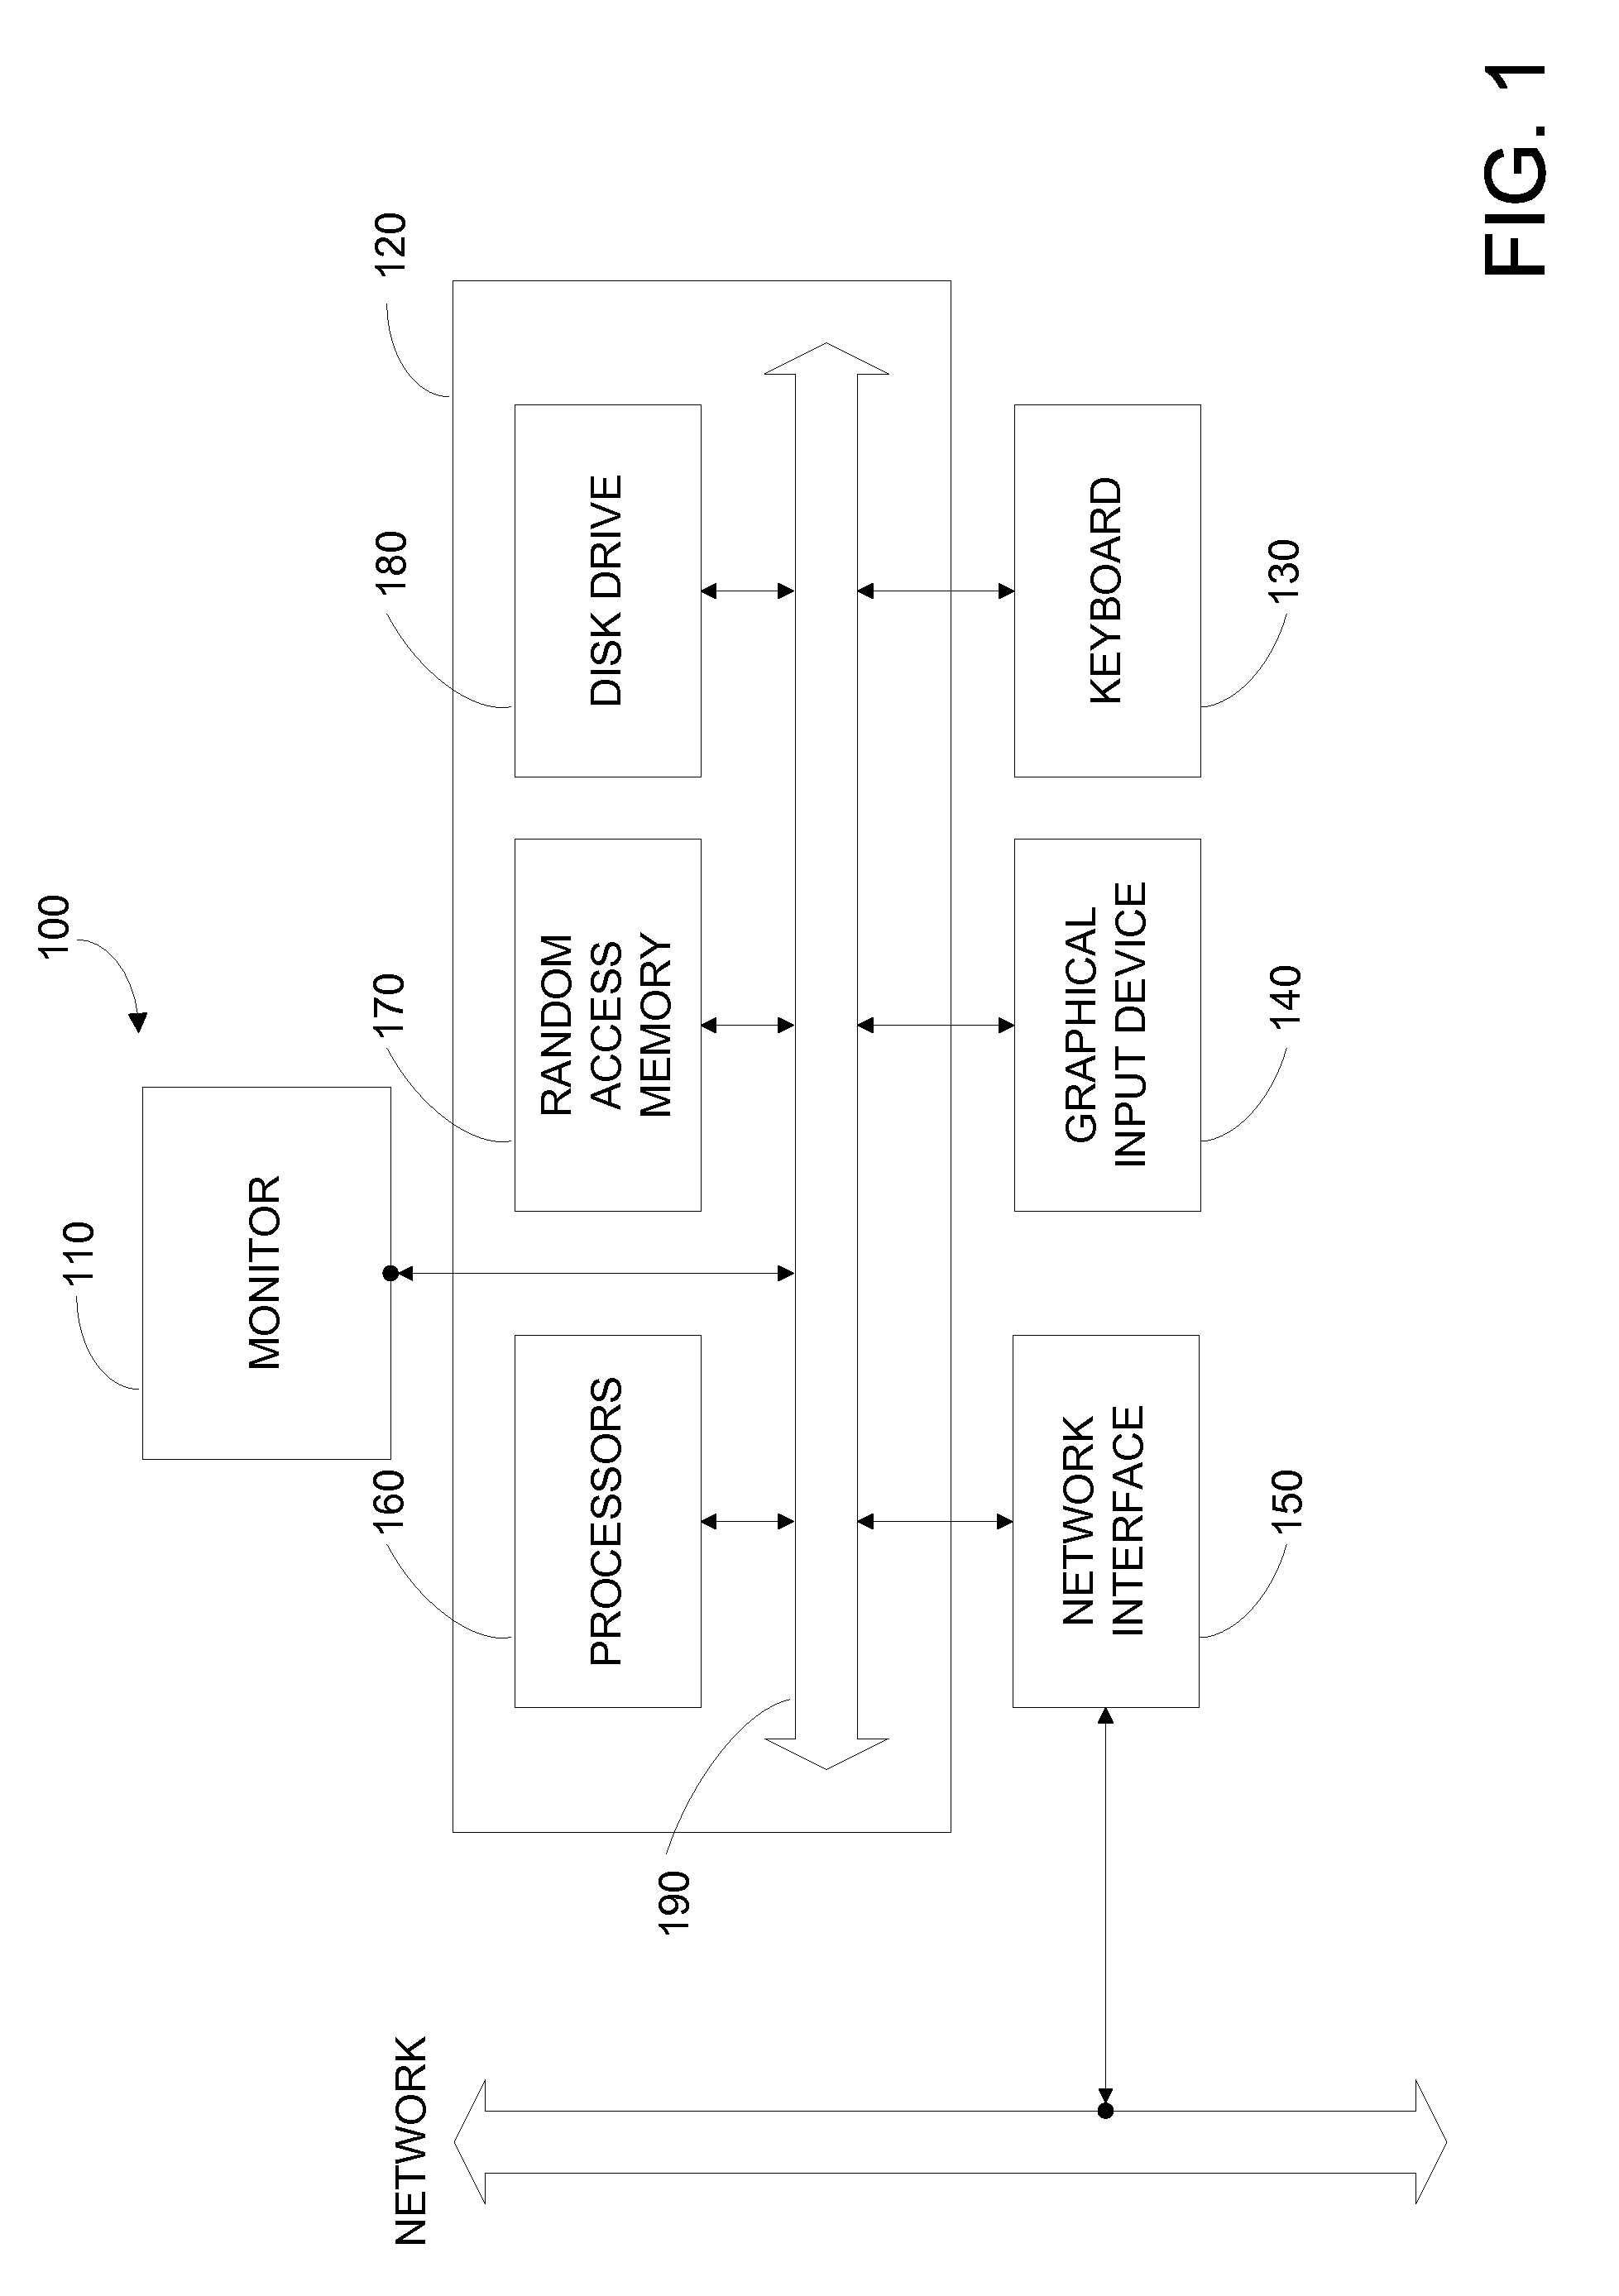 Subsurface Rendering Methods and Apparatus